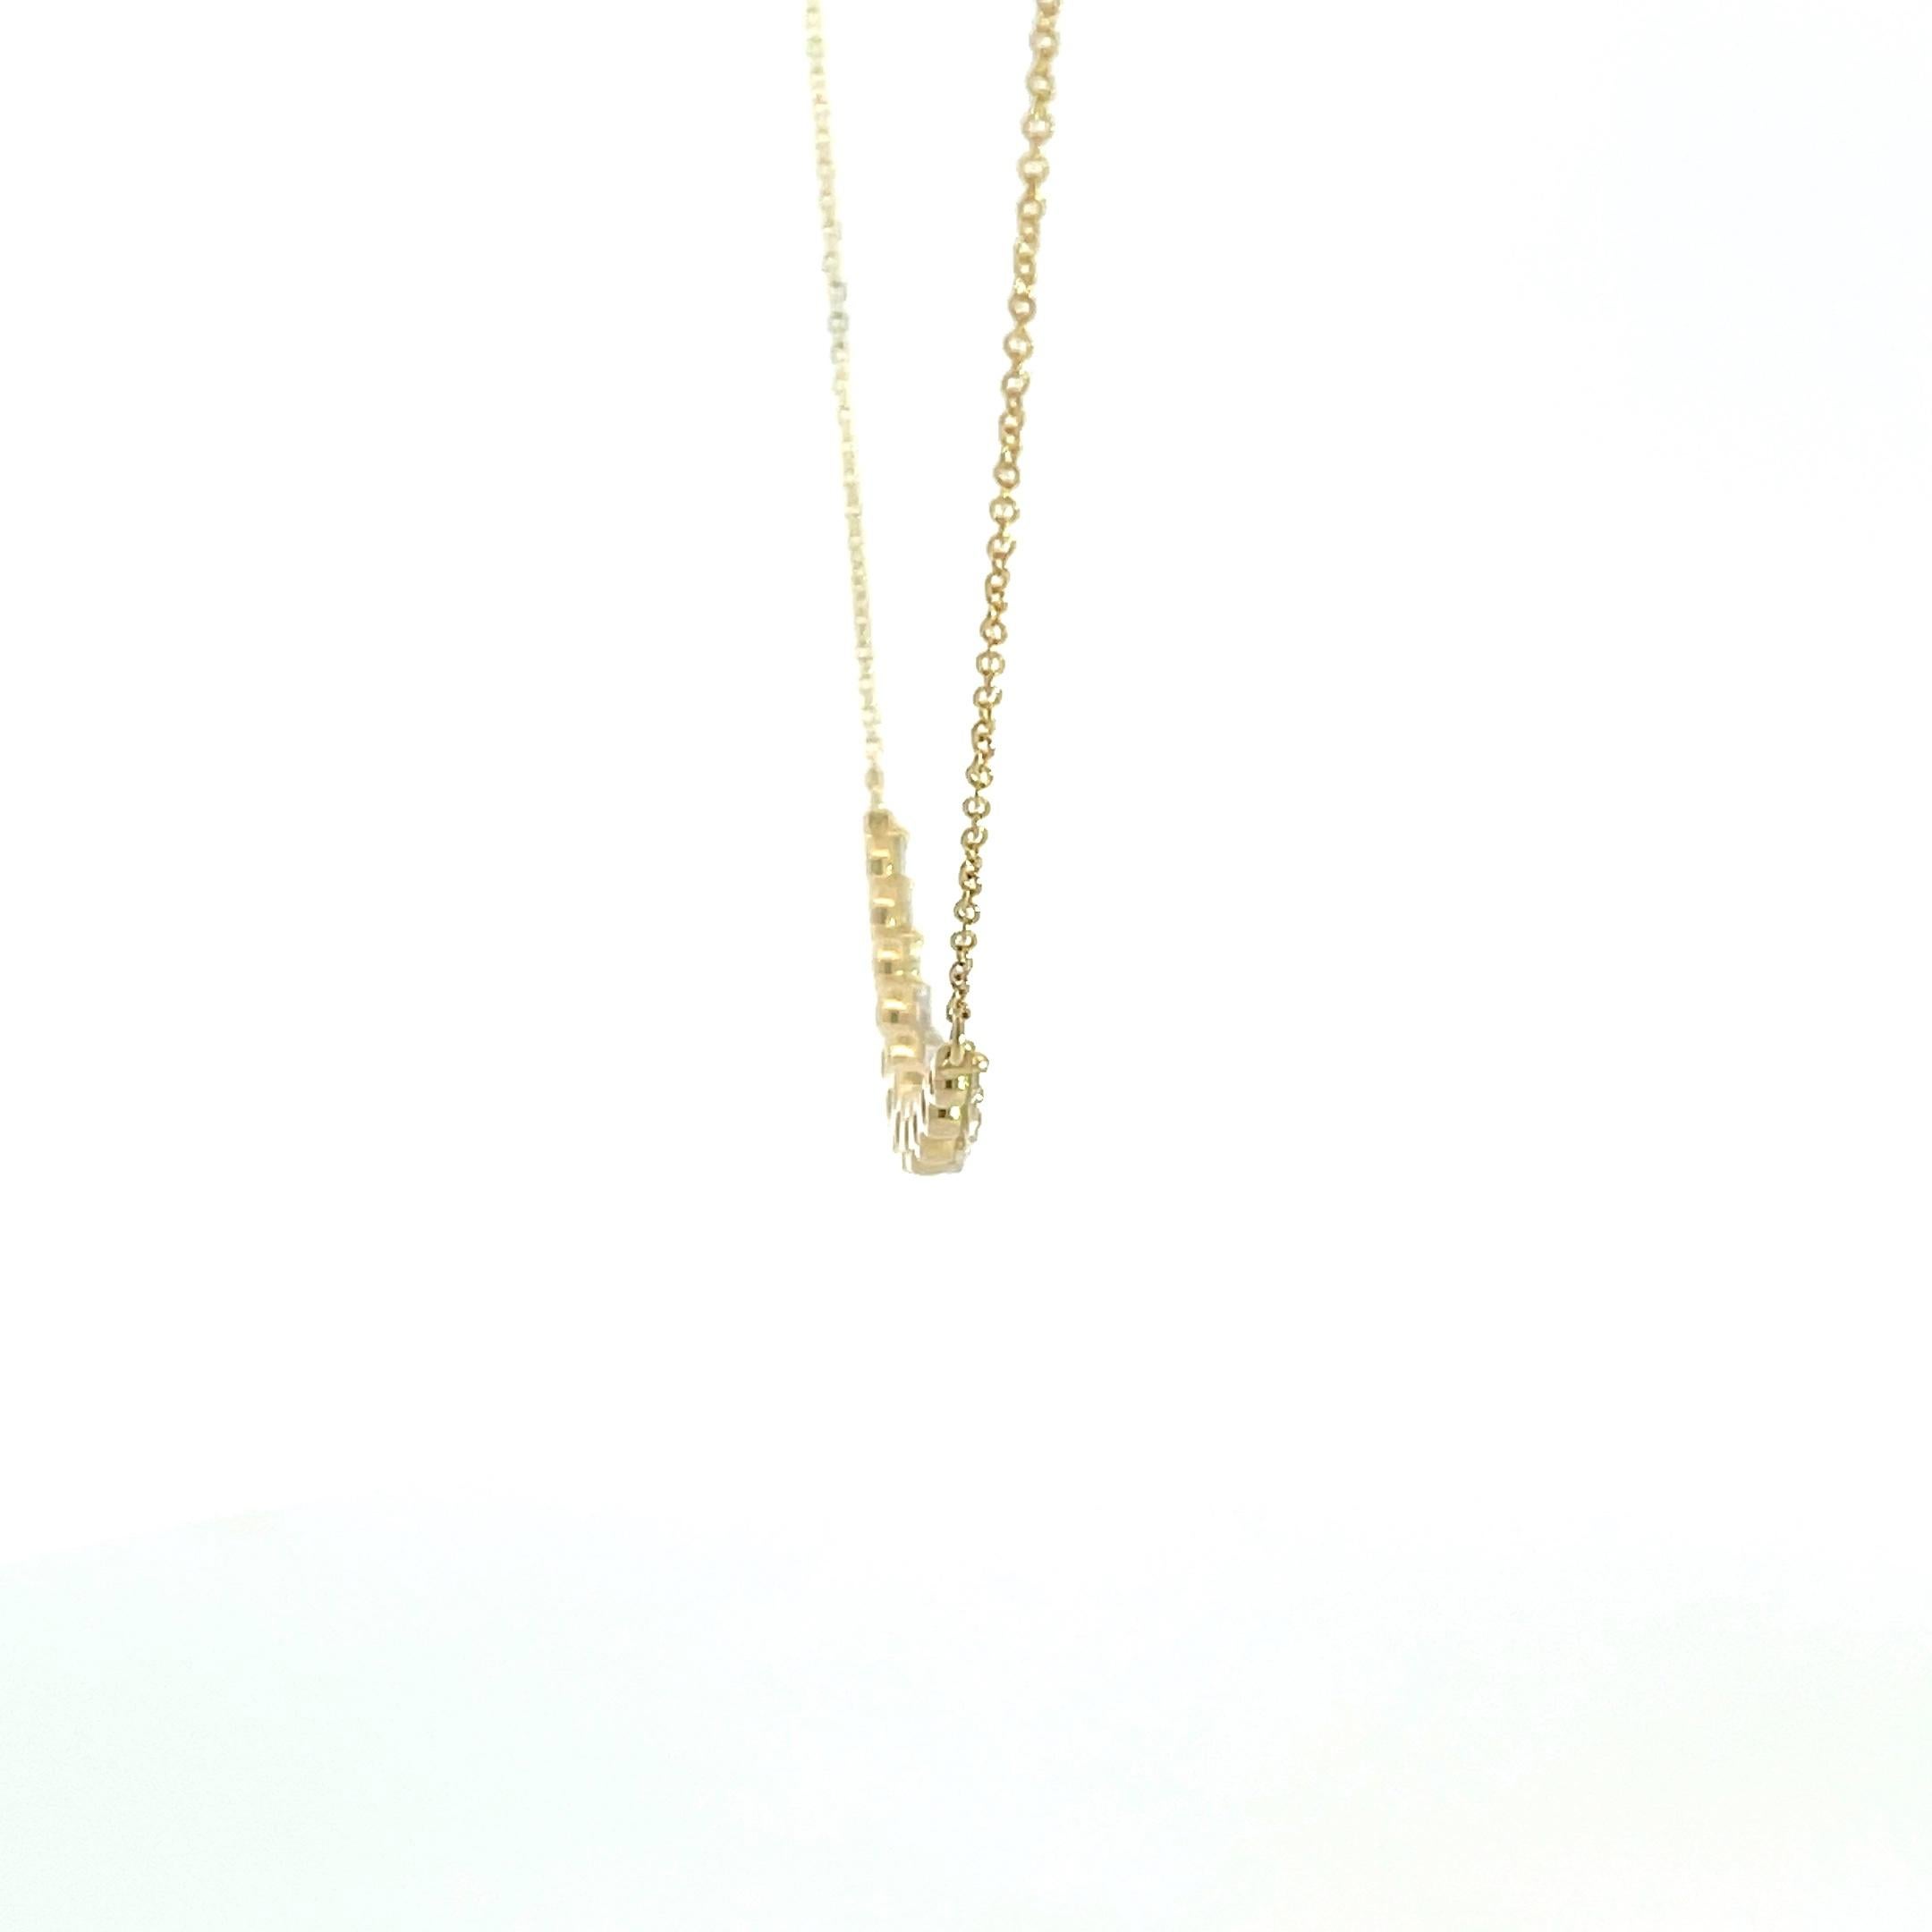 Beautiful 14K yellow gold diamond smile necklace. Can also be called a graduated, curved, or bar necklace. This fashion forward look can be dressed up, dressed down, and worn for any and all occasions. The diamond quality is white GH in color and SI